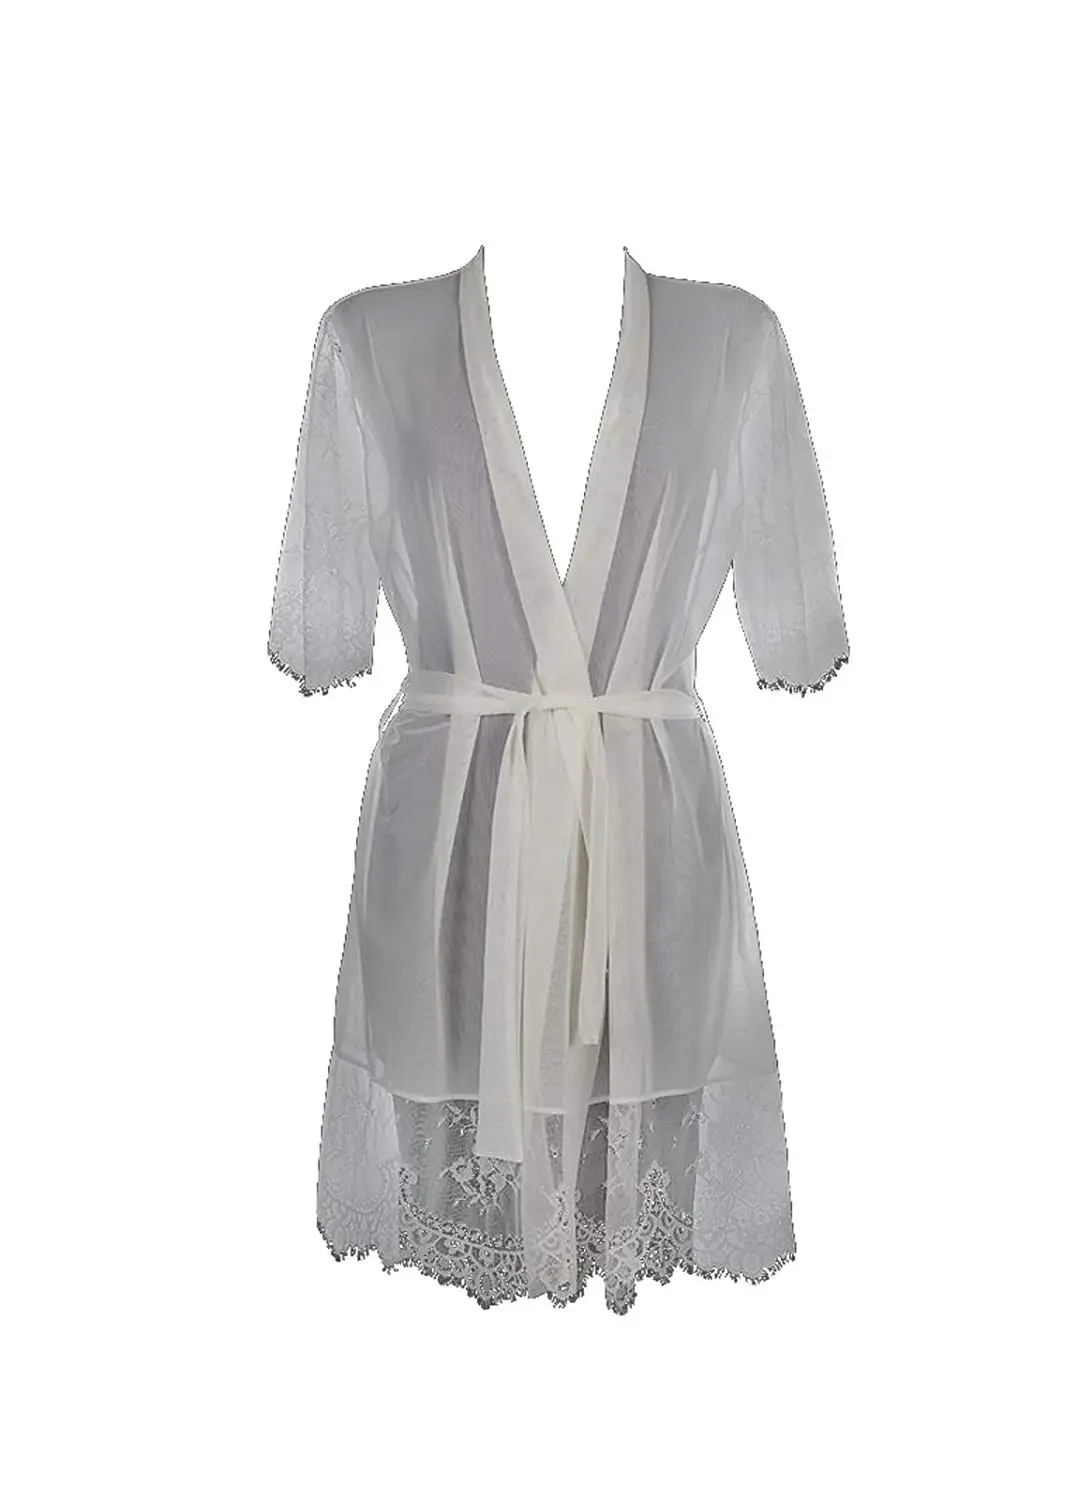 Cheap Negligee Women, find Negligee Women deals on line at Alibaba.com